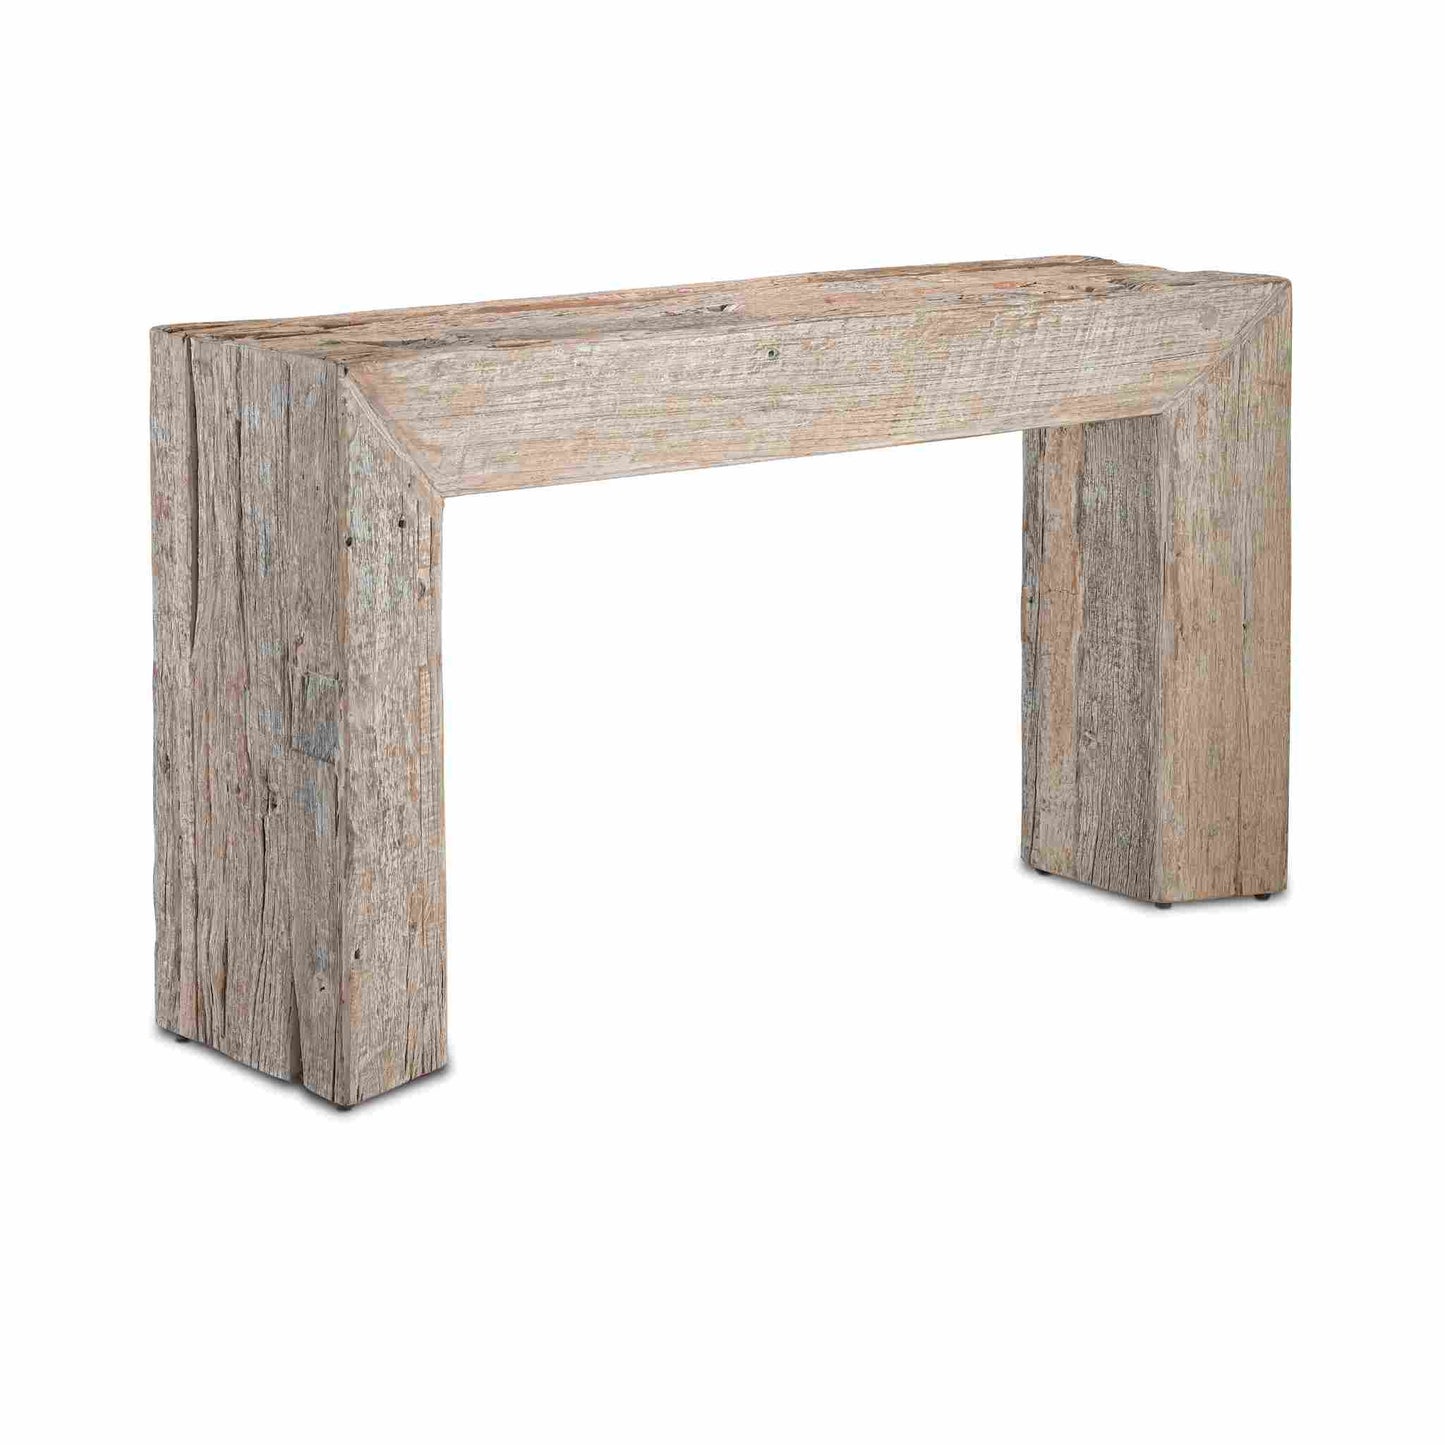 Kanor Console Table H: 33" W: 60" D: 16"